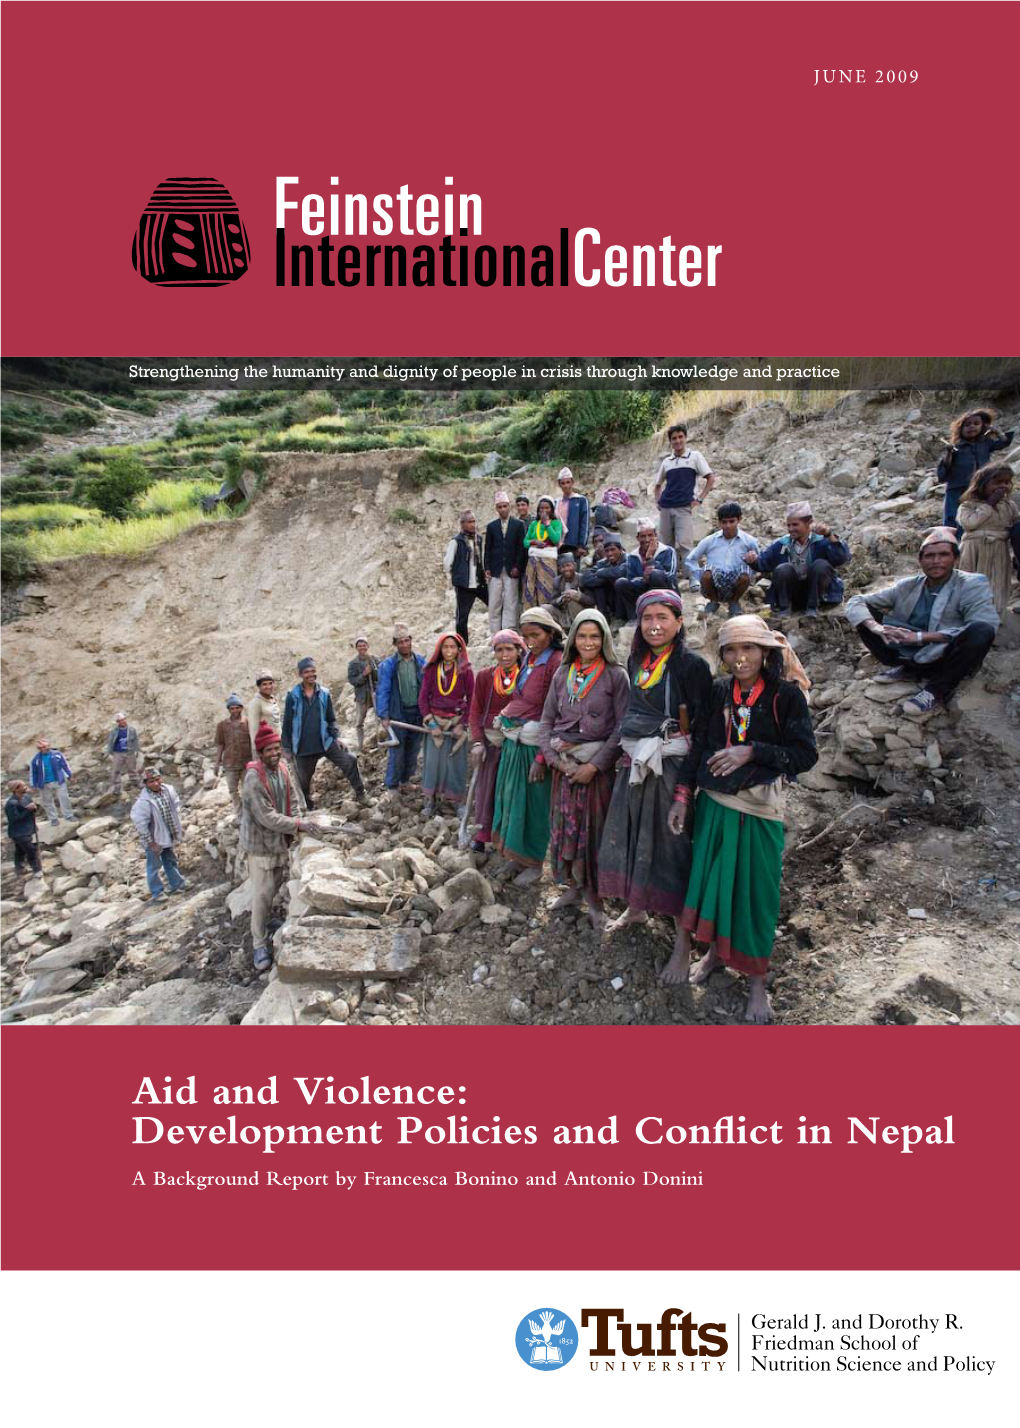 Aid and Violence: Development Policies and Conflict in Nepal a Background Report by Francesca Bonino and Antonio Donini ©2009 Feinstein International Center